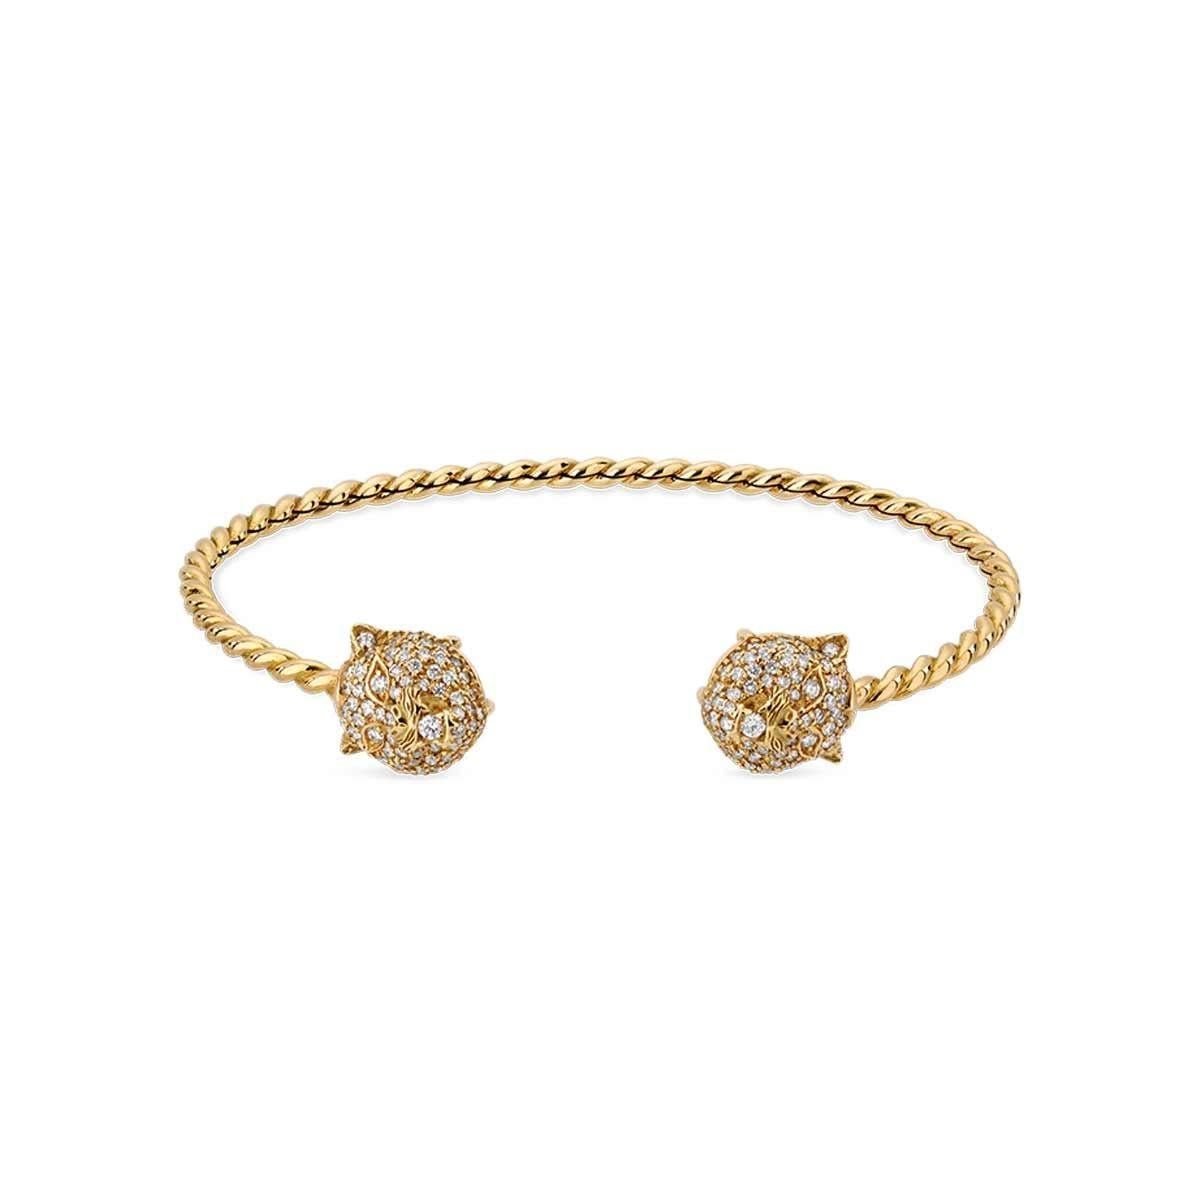 This piece gives you the best of both worlds. Handcrafted from 18K yellow gold both ends of this Gucci bracelet features their timeless Le Marché des Merveilles feline head covered in precious diamonds. You can instantly achieve a different look by